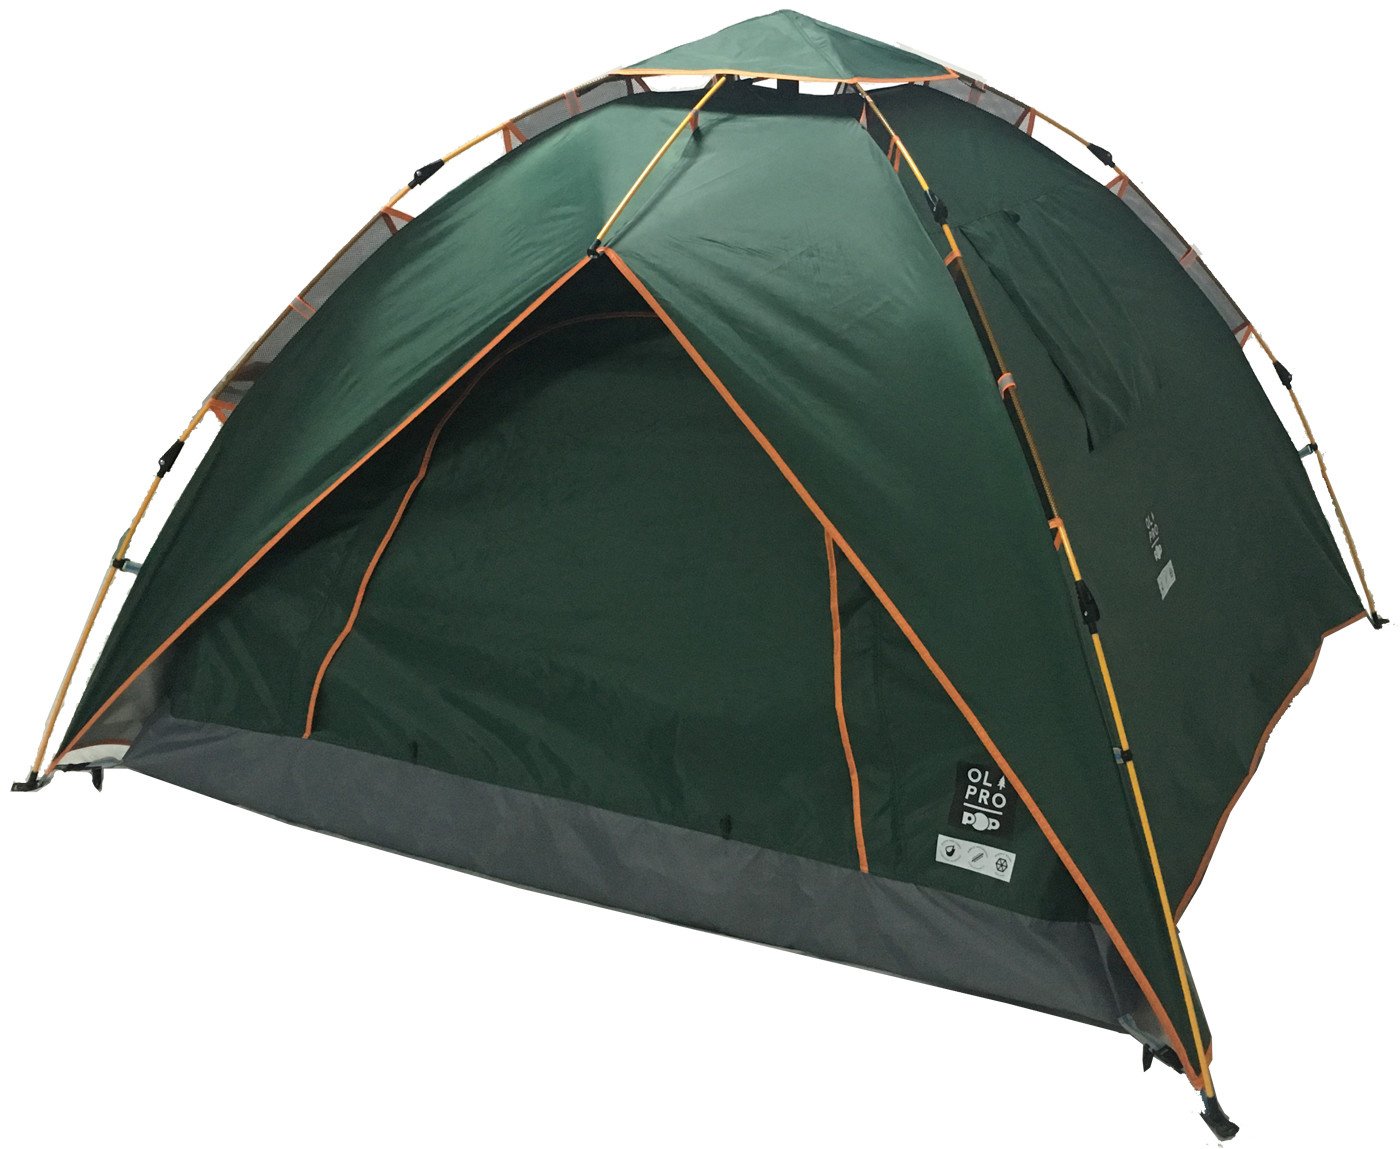 Olpro 2 Man 1 Room Pop Up Dome Camping Tent